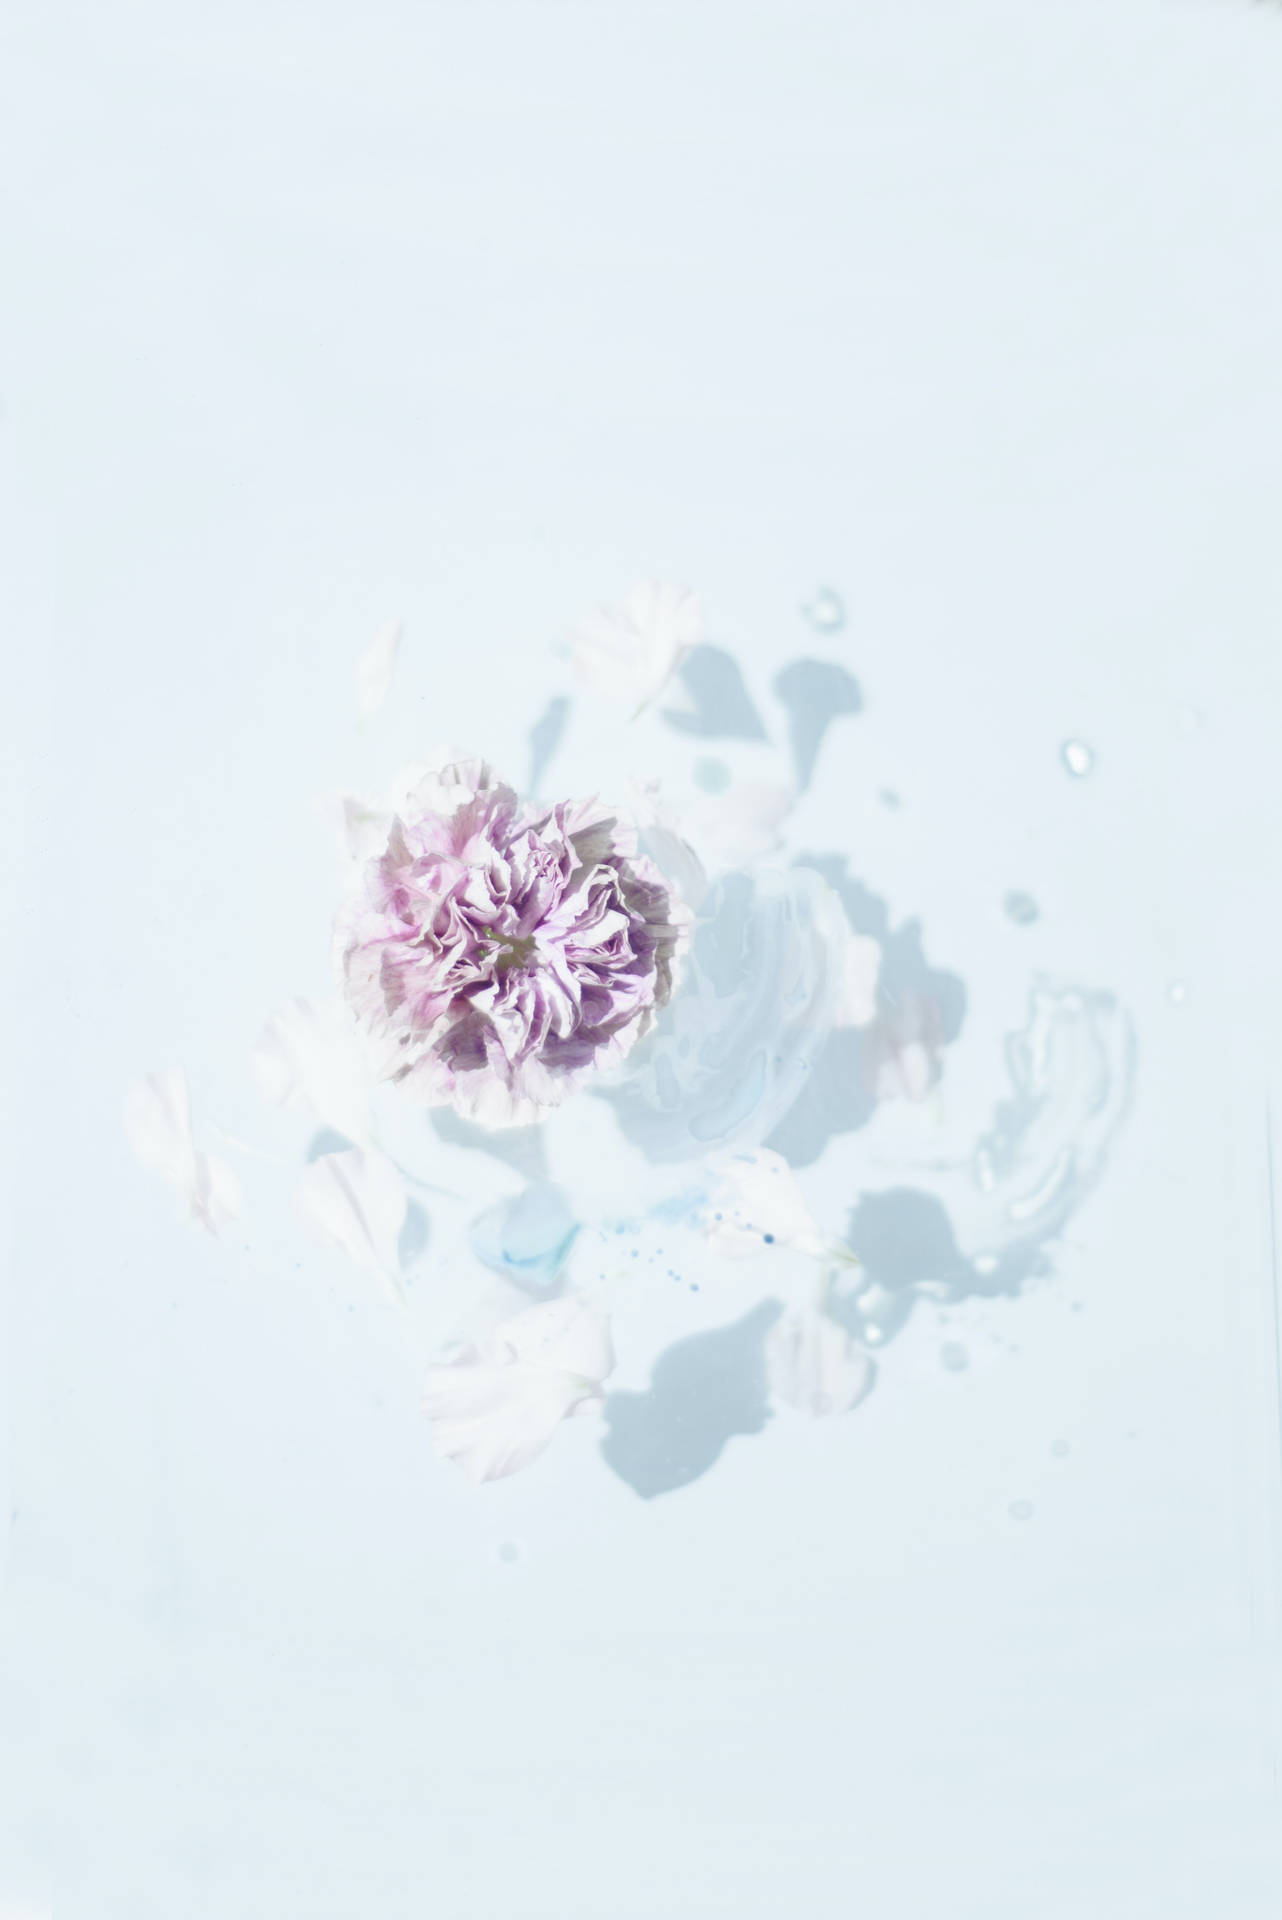 4k Iphone Flower On Water Background